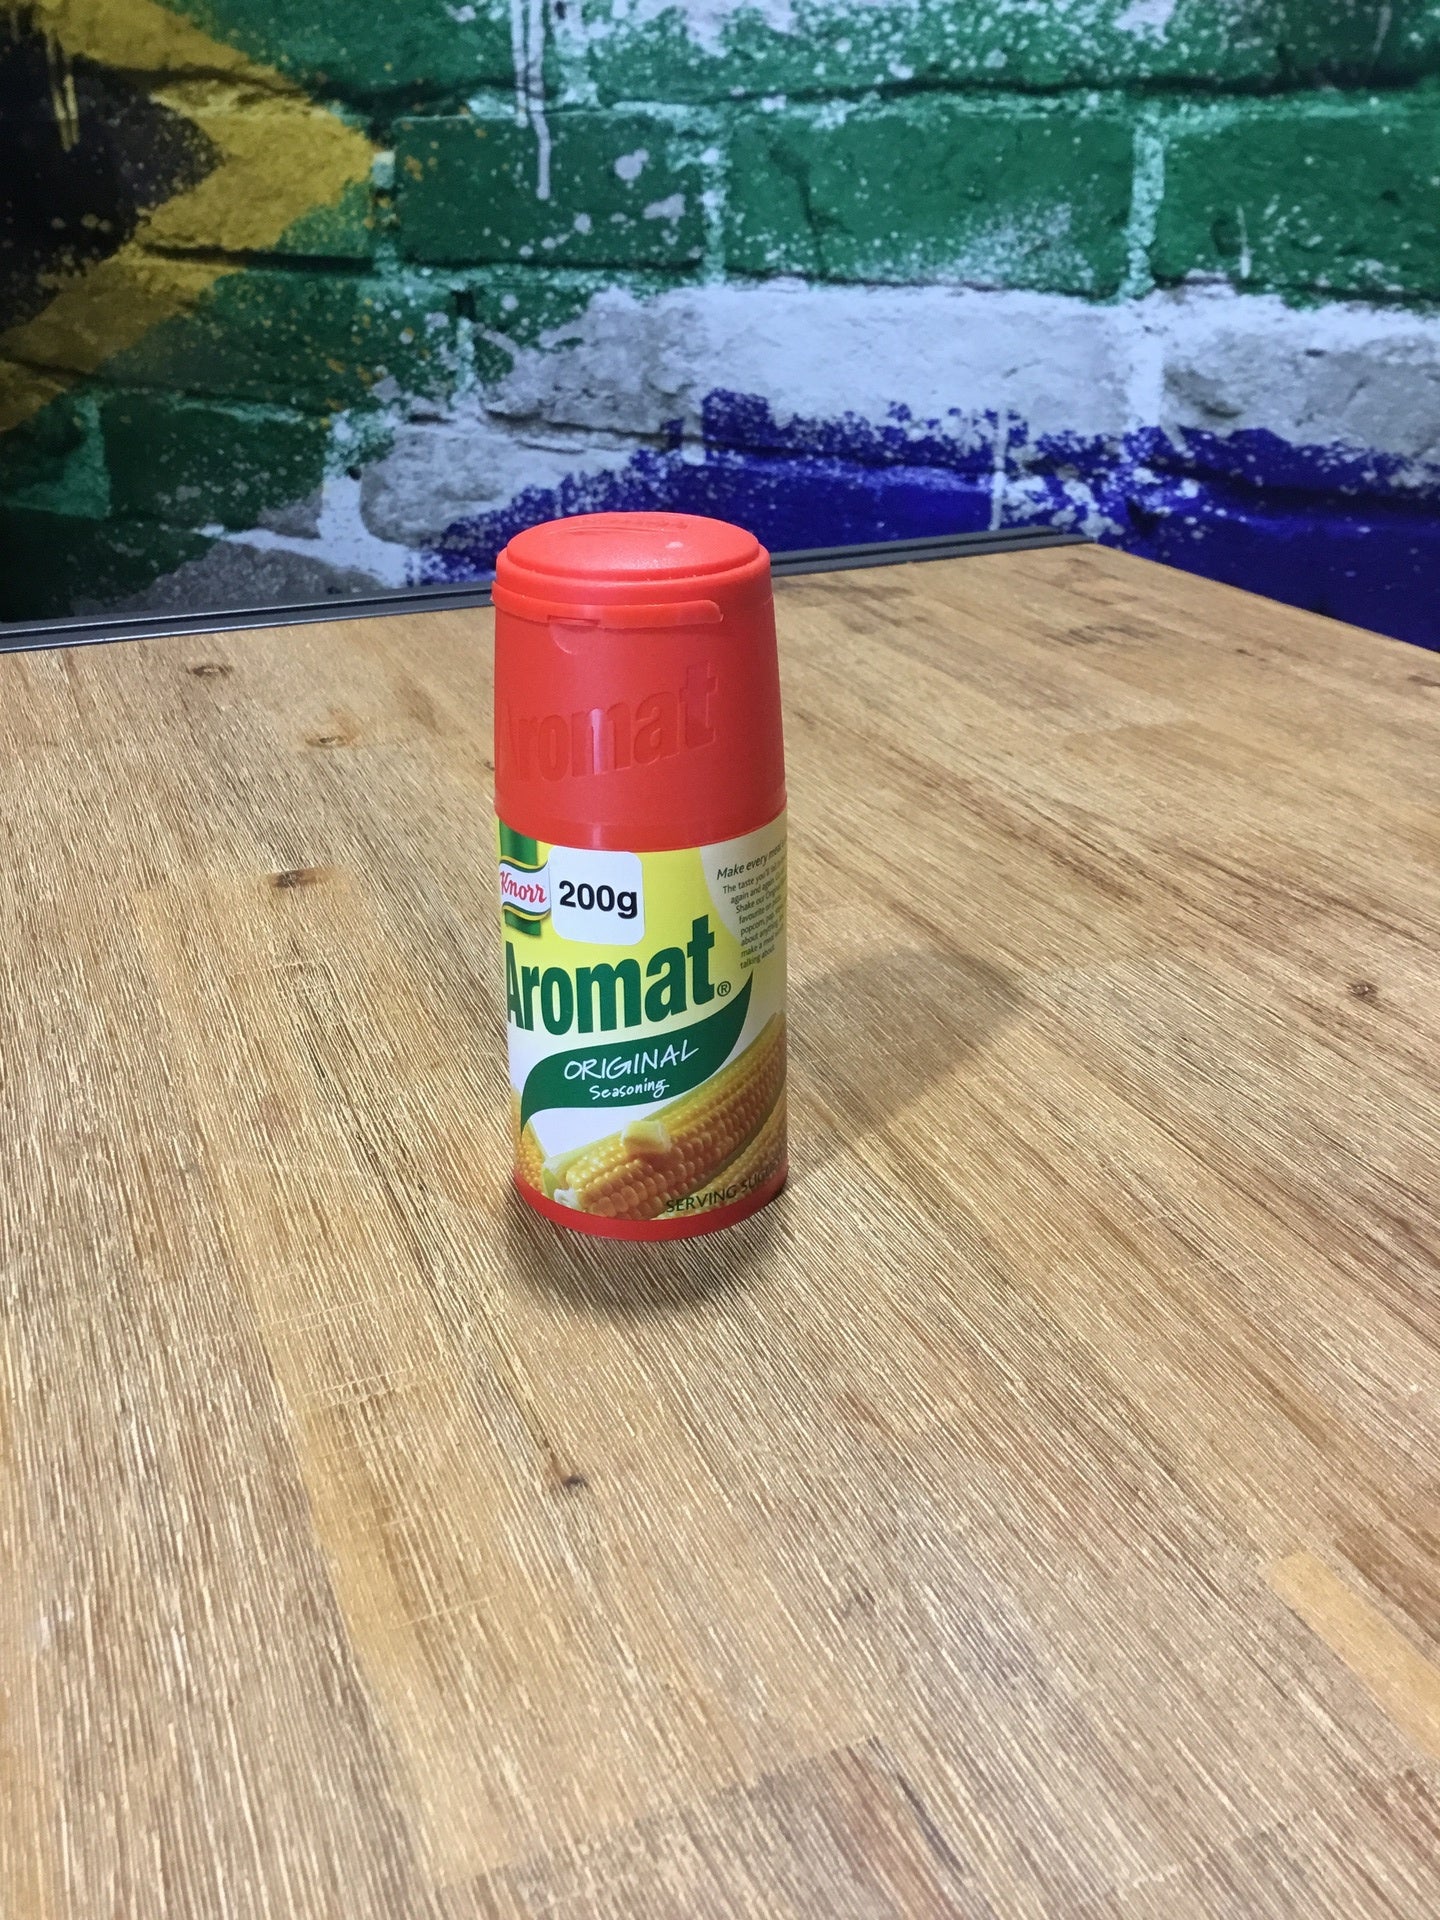 Knorr Aromat Large Canister - 200g